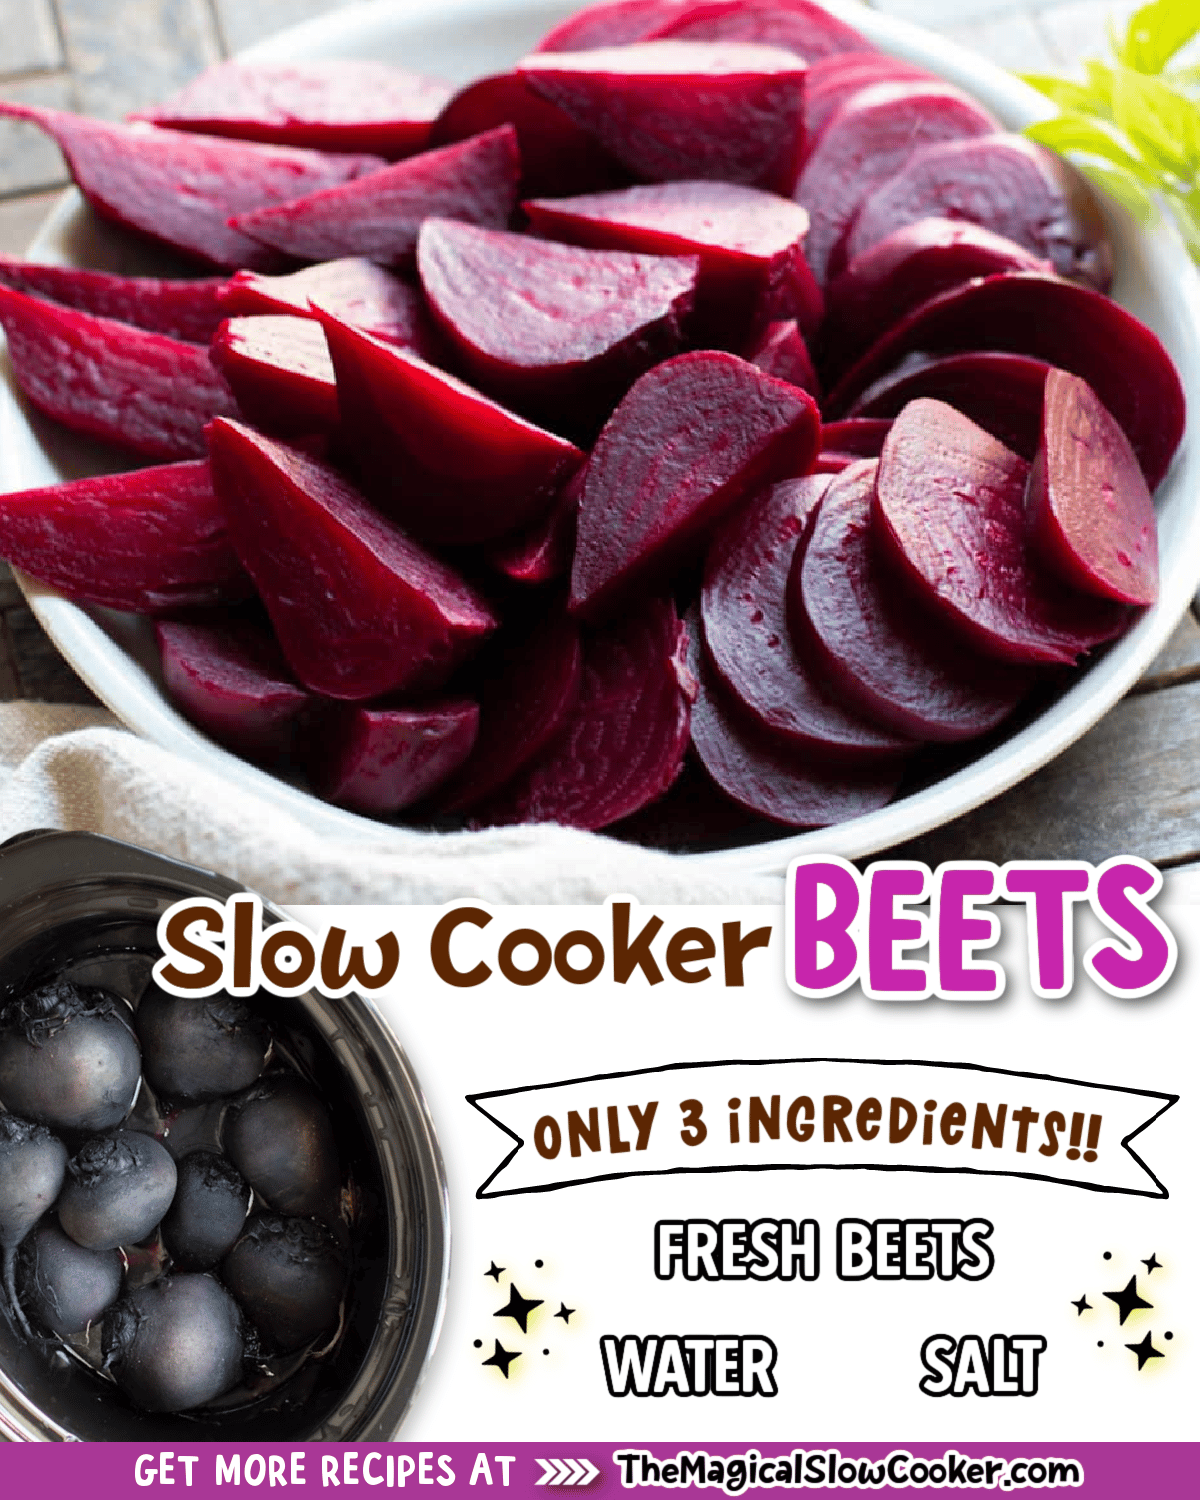 Collage of beets images with text of what ingredients are.